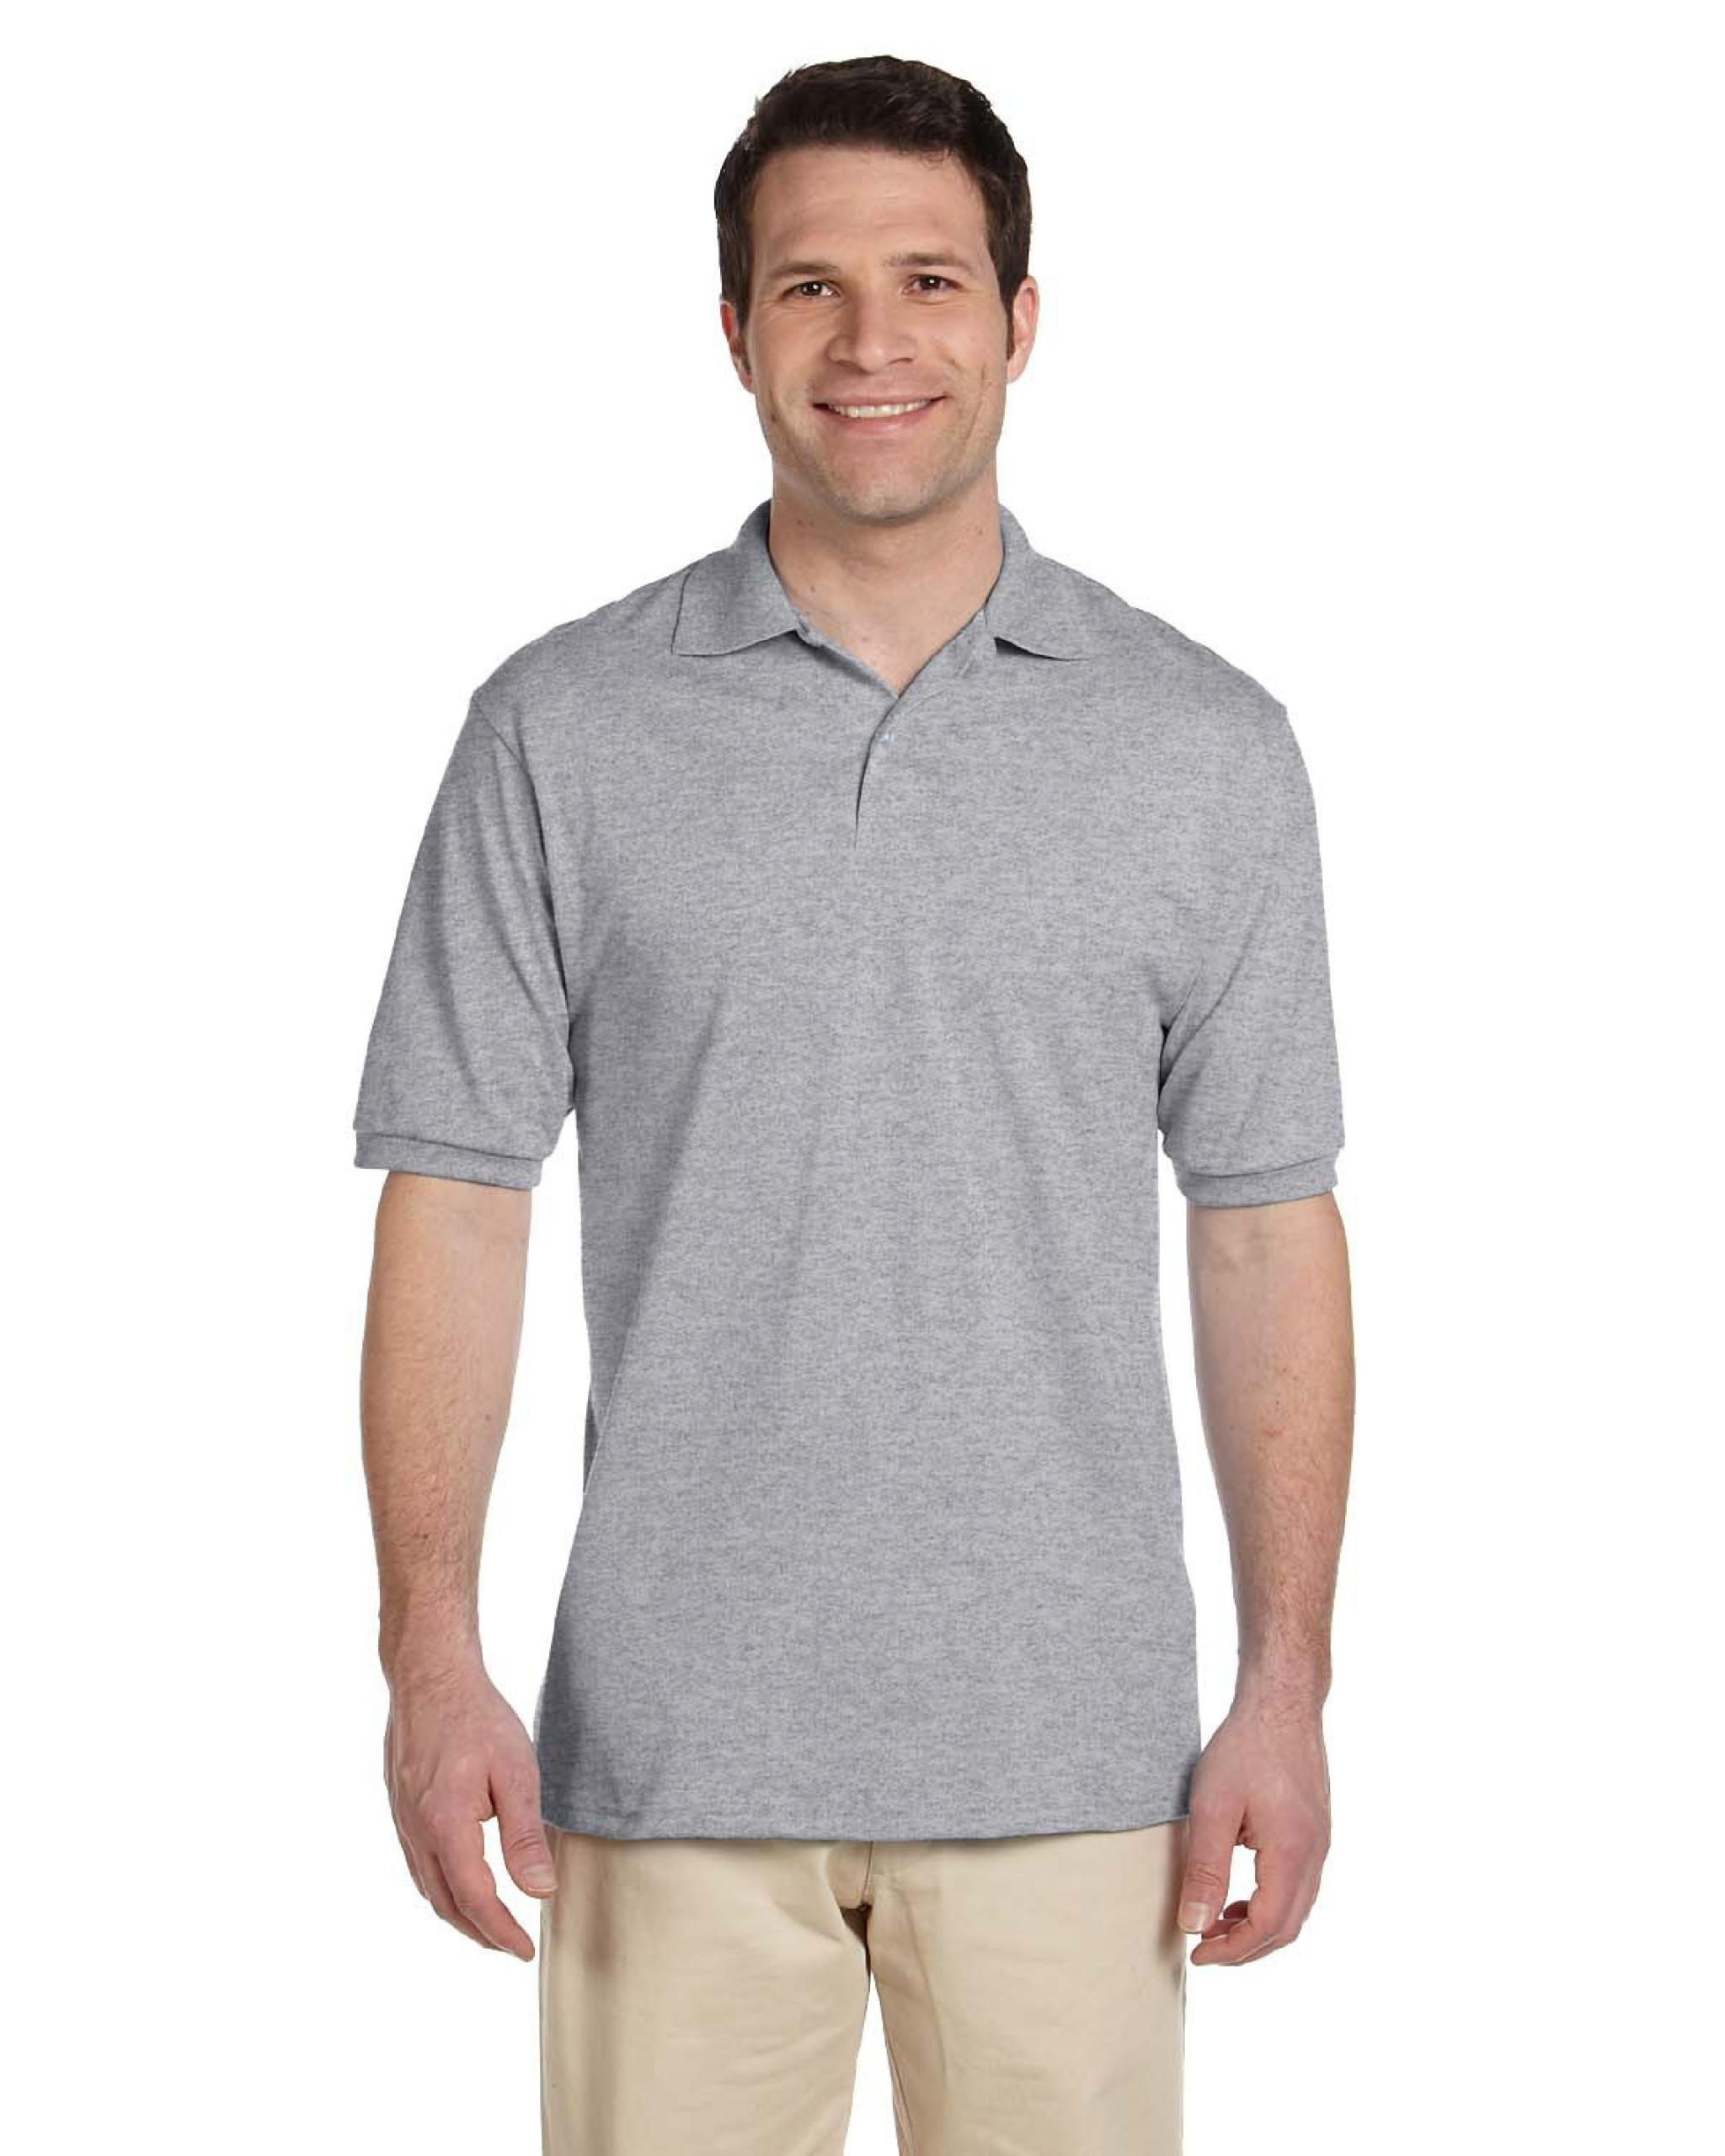 Adult Men’s Short Sleeve Polo – GREY – Plymouth Scholars Charter Academy